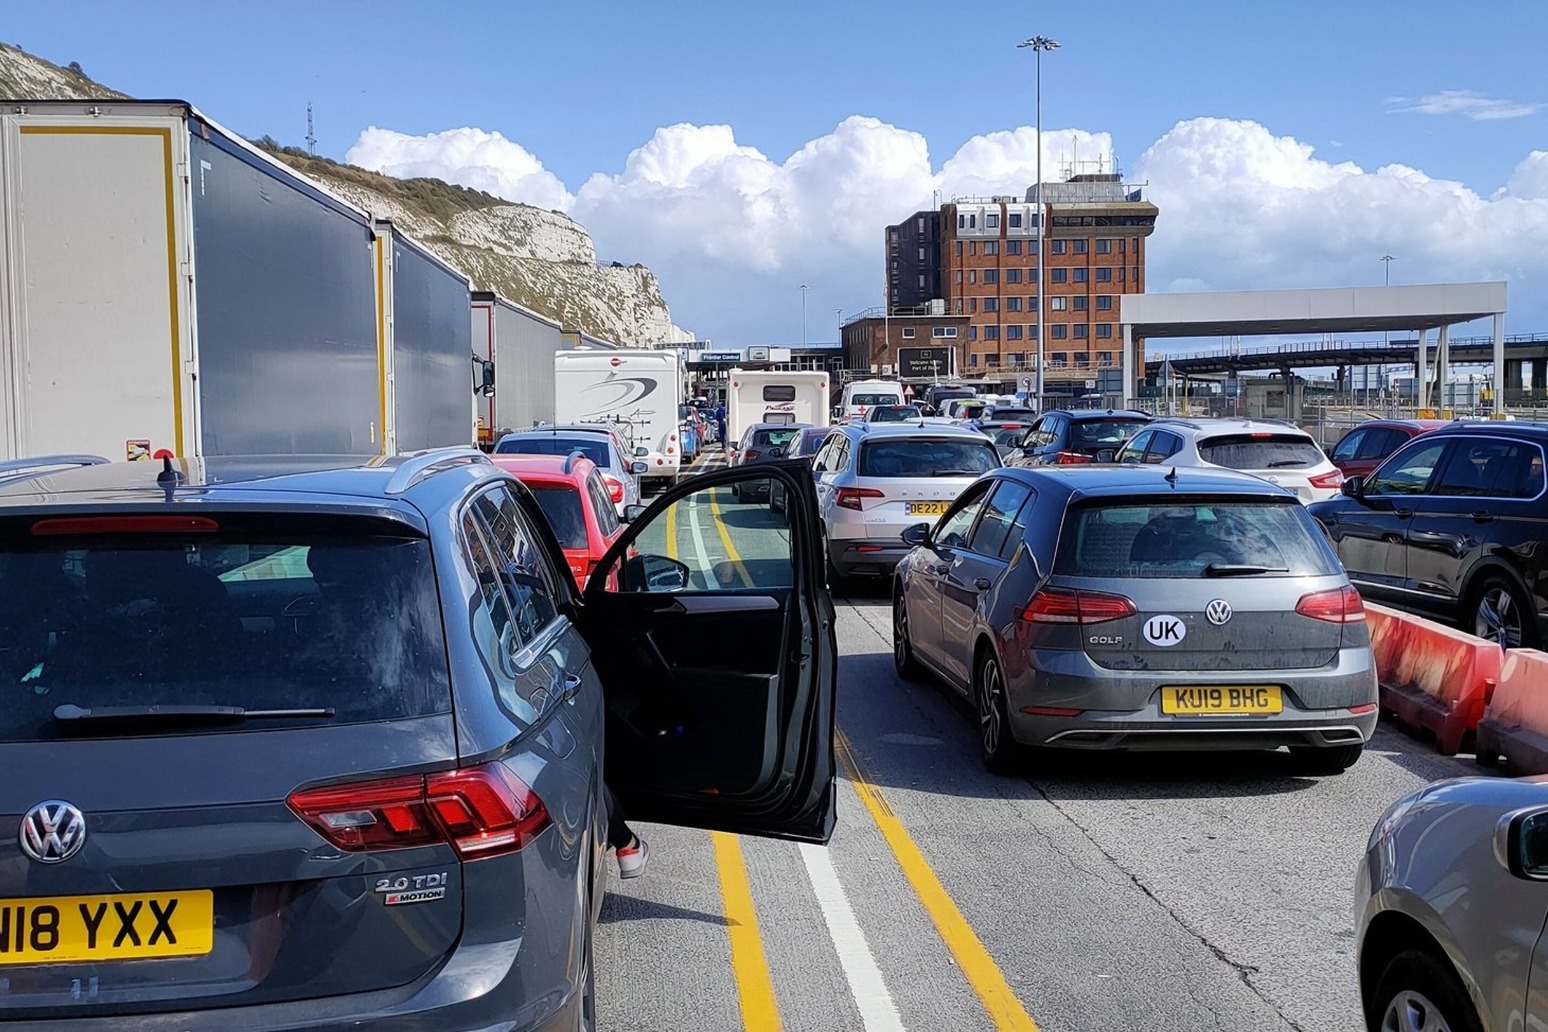 Cross Channel disruption plunges Dover into traffic chaos near port